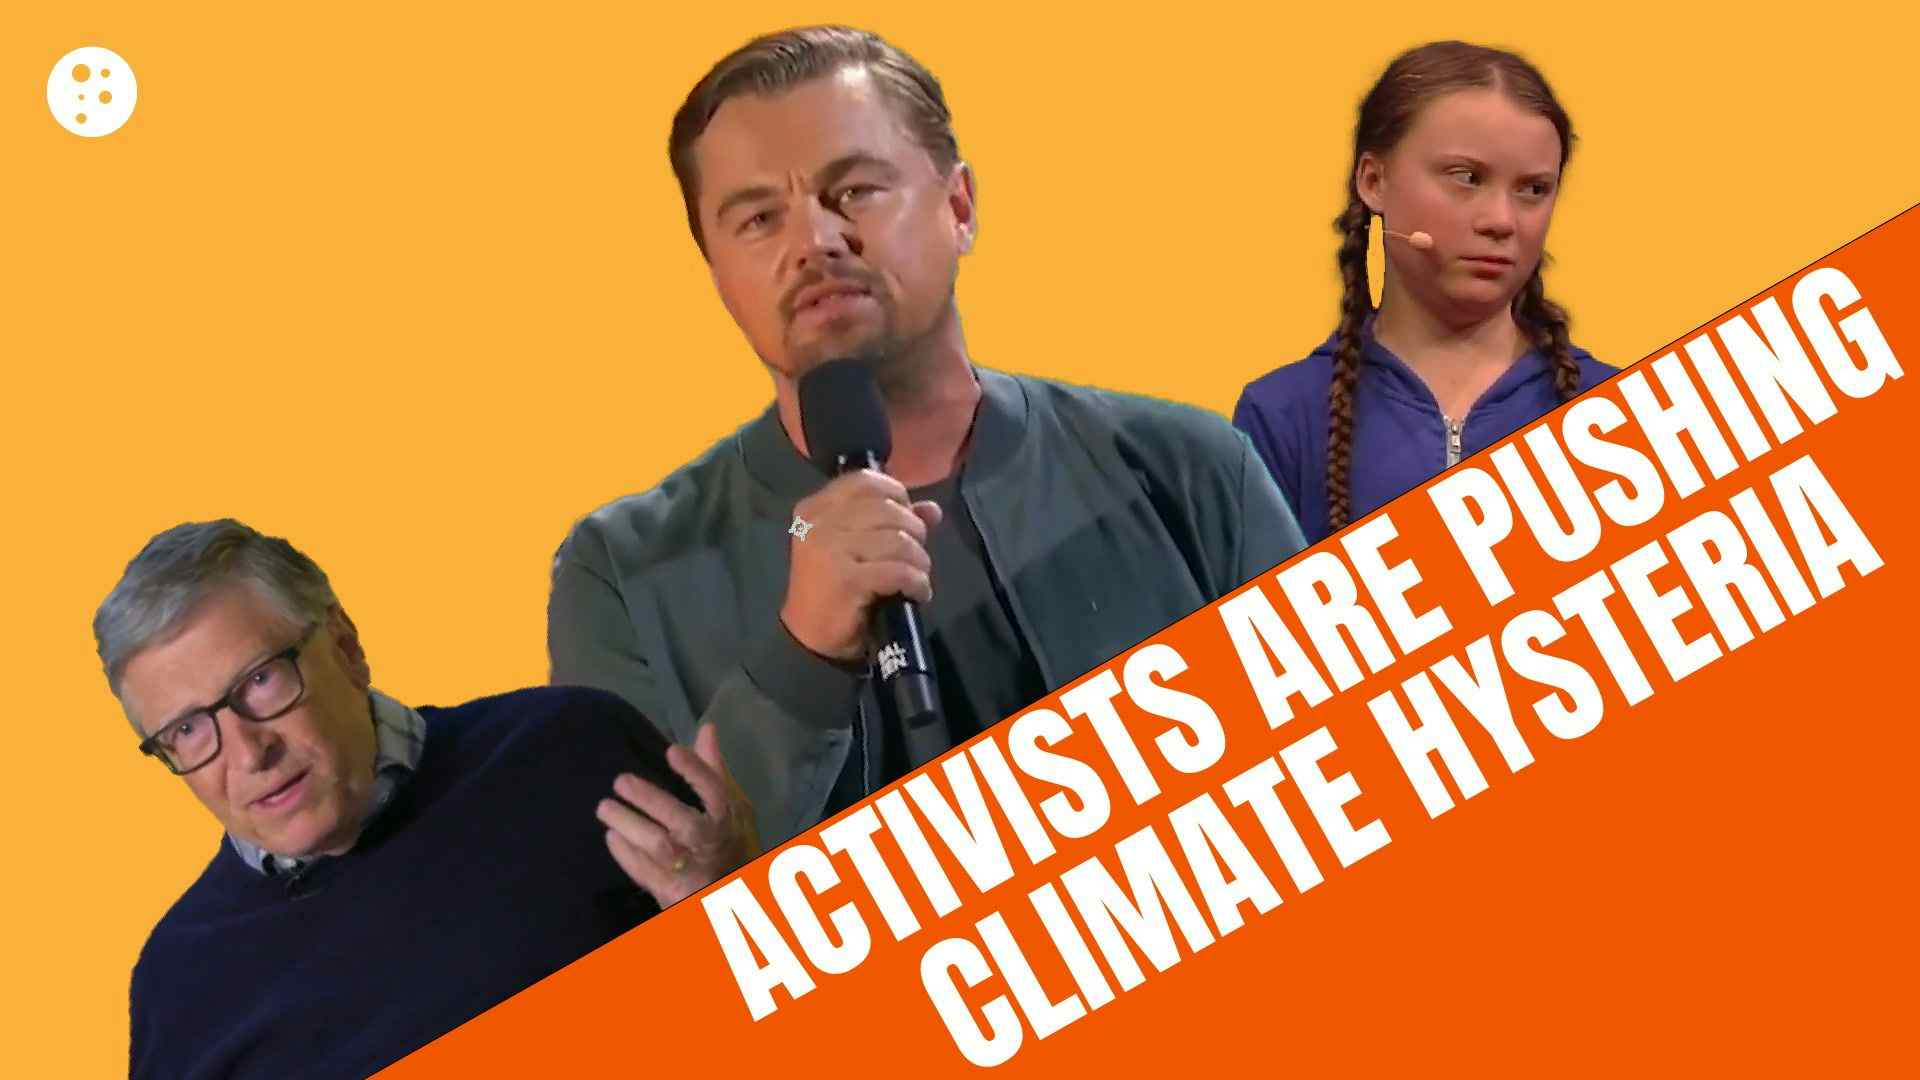 Activists Are Pushing Climate Hysteria